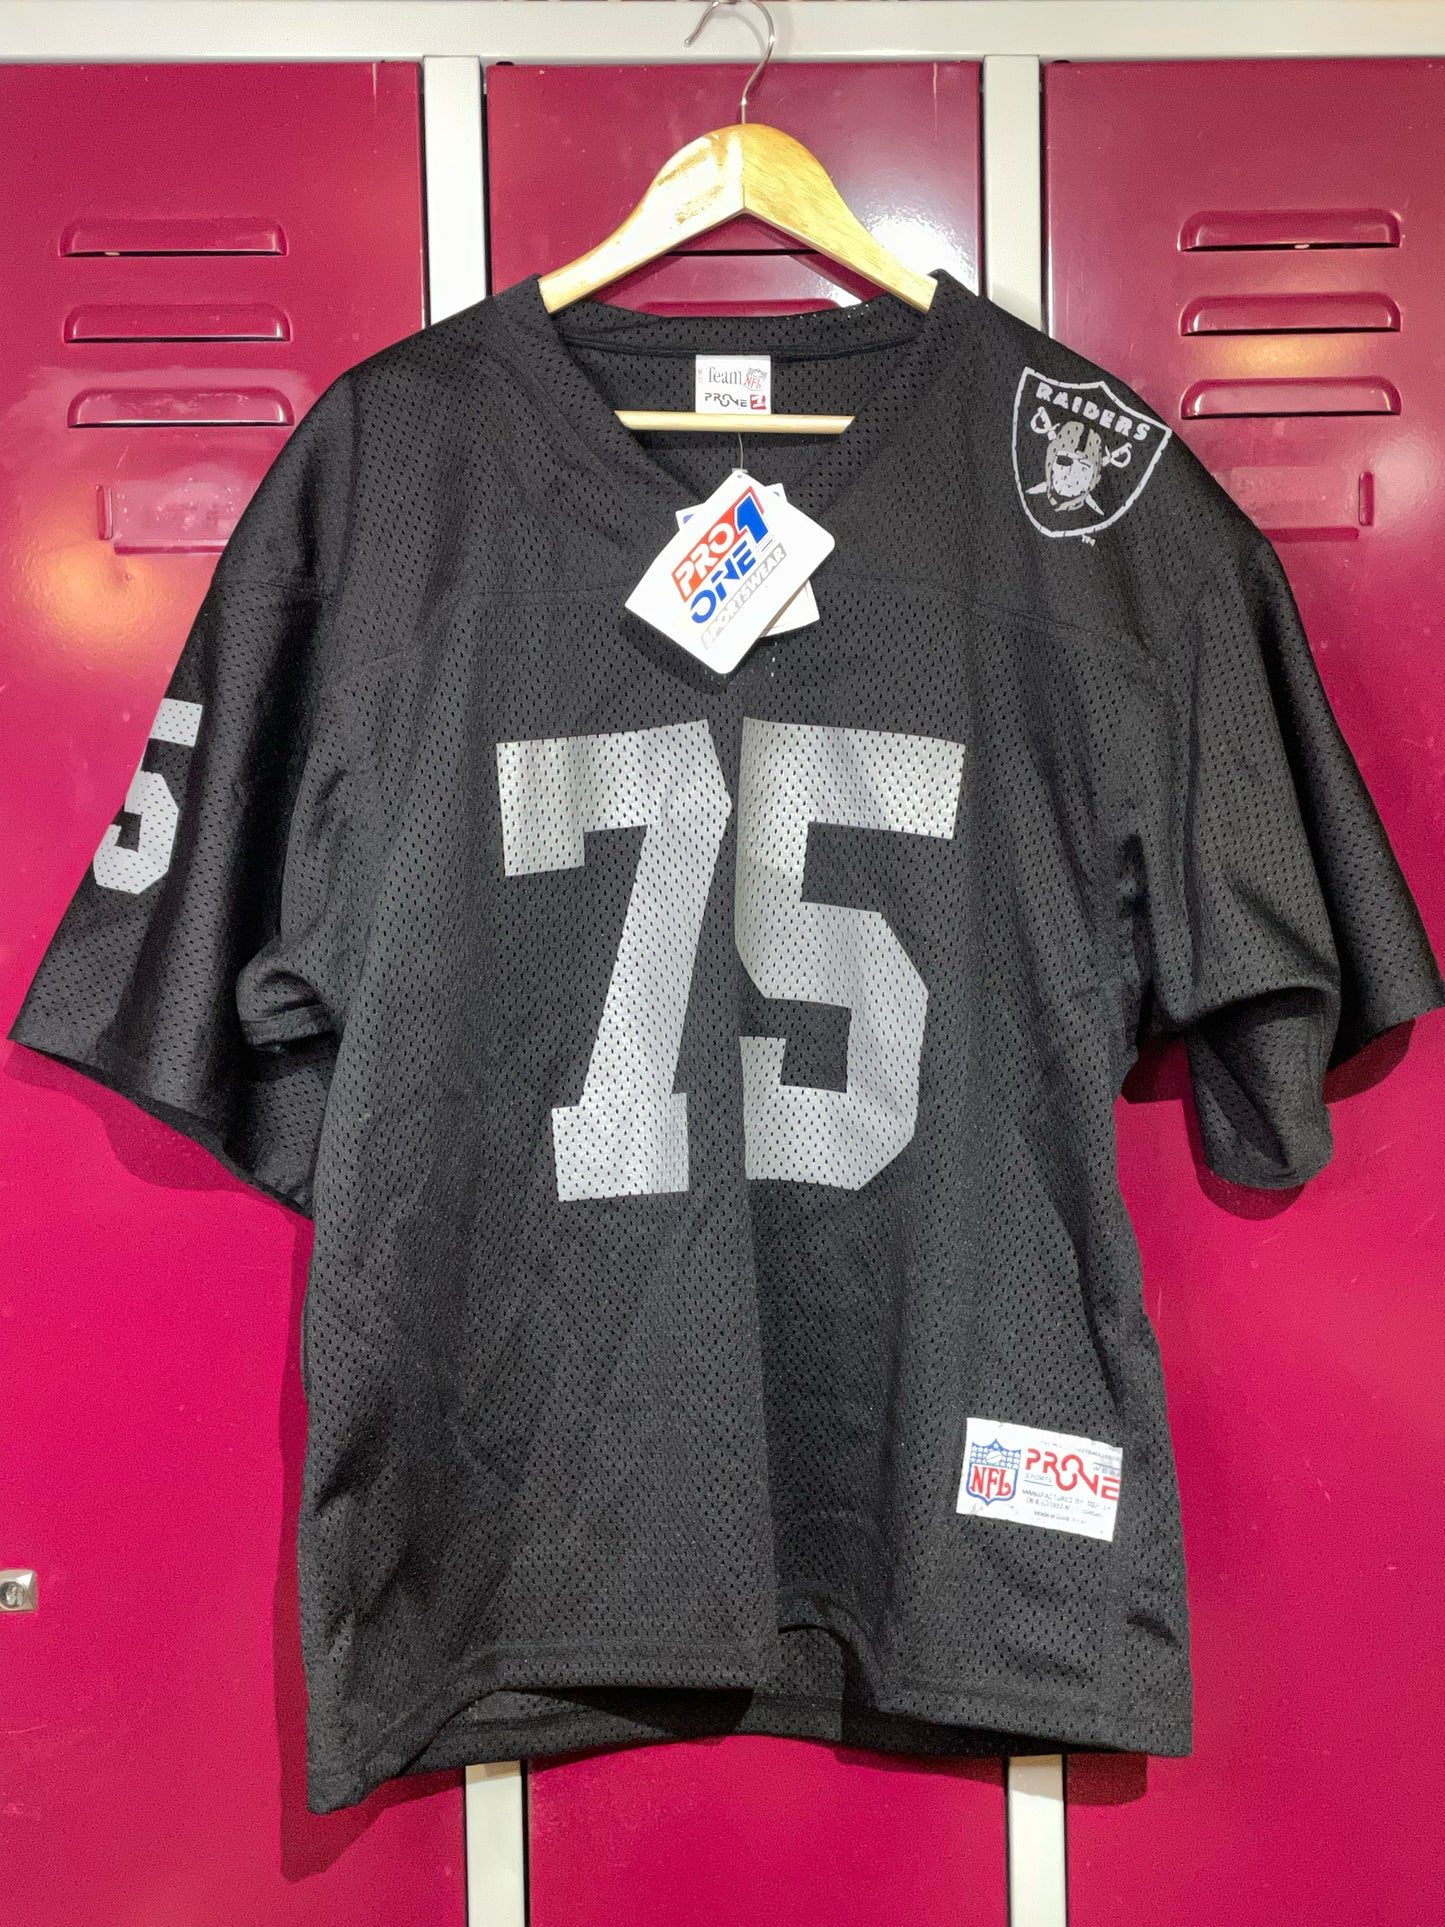 DS VINTAGE 90s PRO ONE LOS ANGELES RAIDERS 75 NFL JERSEY SZ: One size